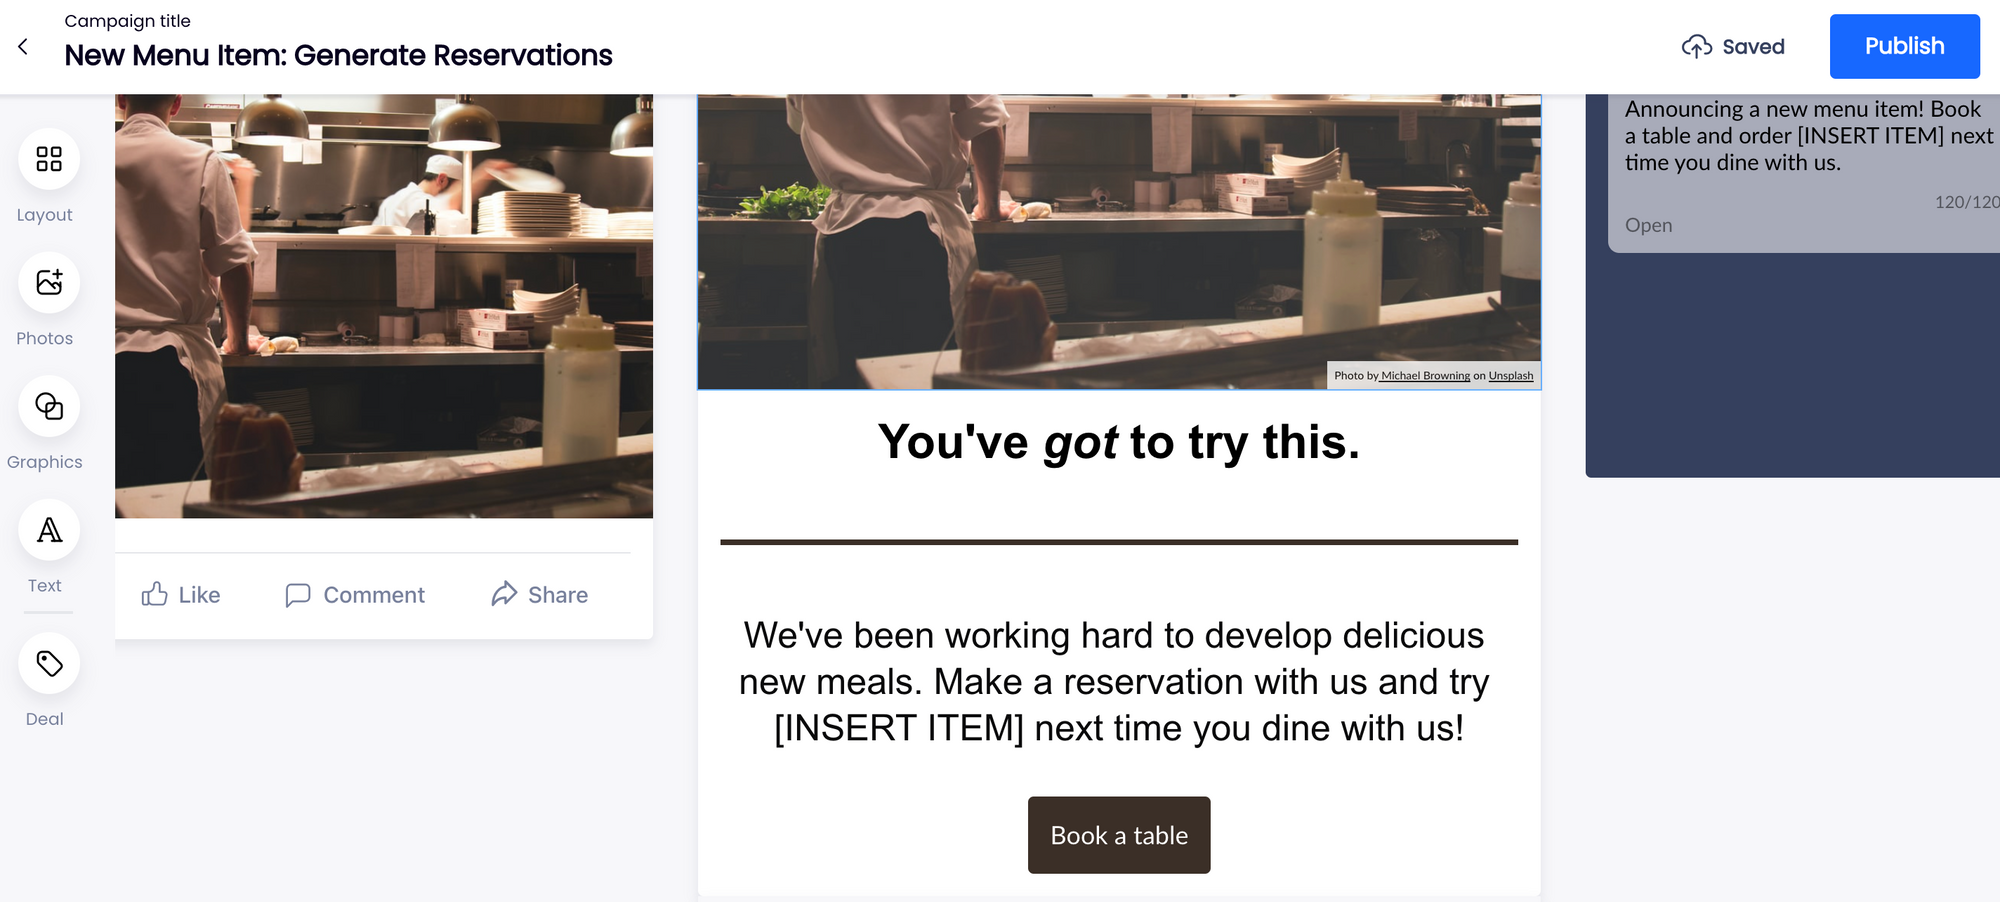 A preview of marketing email in the SpotOn Marketing platform with a "Book a table" CTA button.